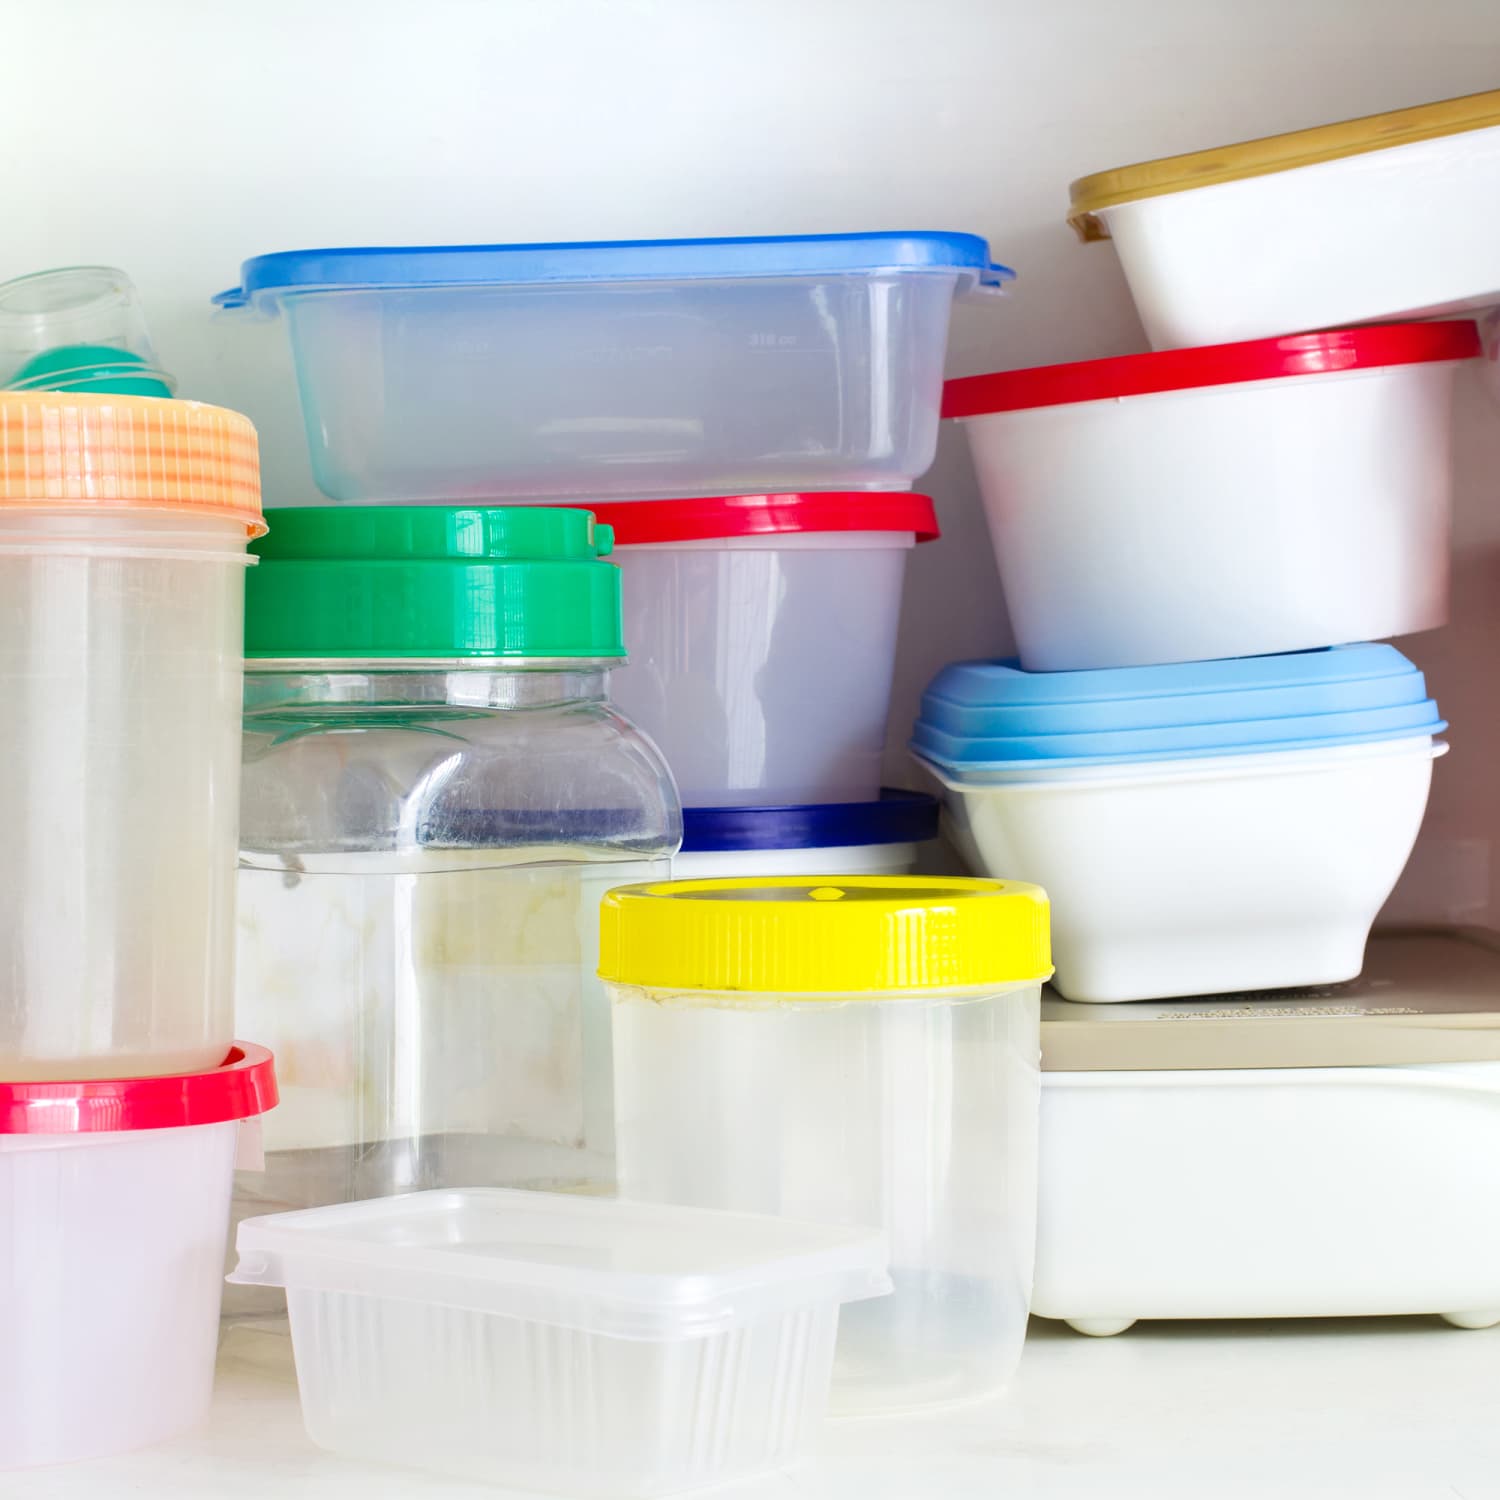 https://cdn.apartmenttherapy.info/image/upload/f_jpg,q_auto:eco,c_fill,g_auto,w_1500,ar_1:1/at%2Forganize-clean%2Ffood-storage-containers-pile-tupperware